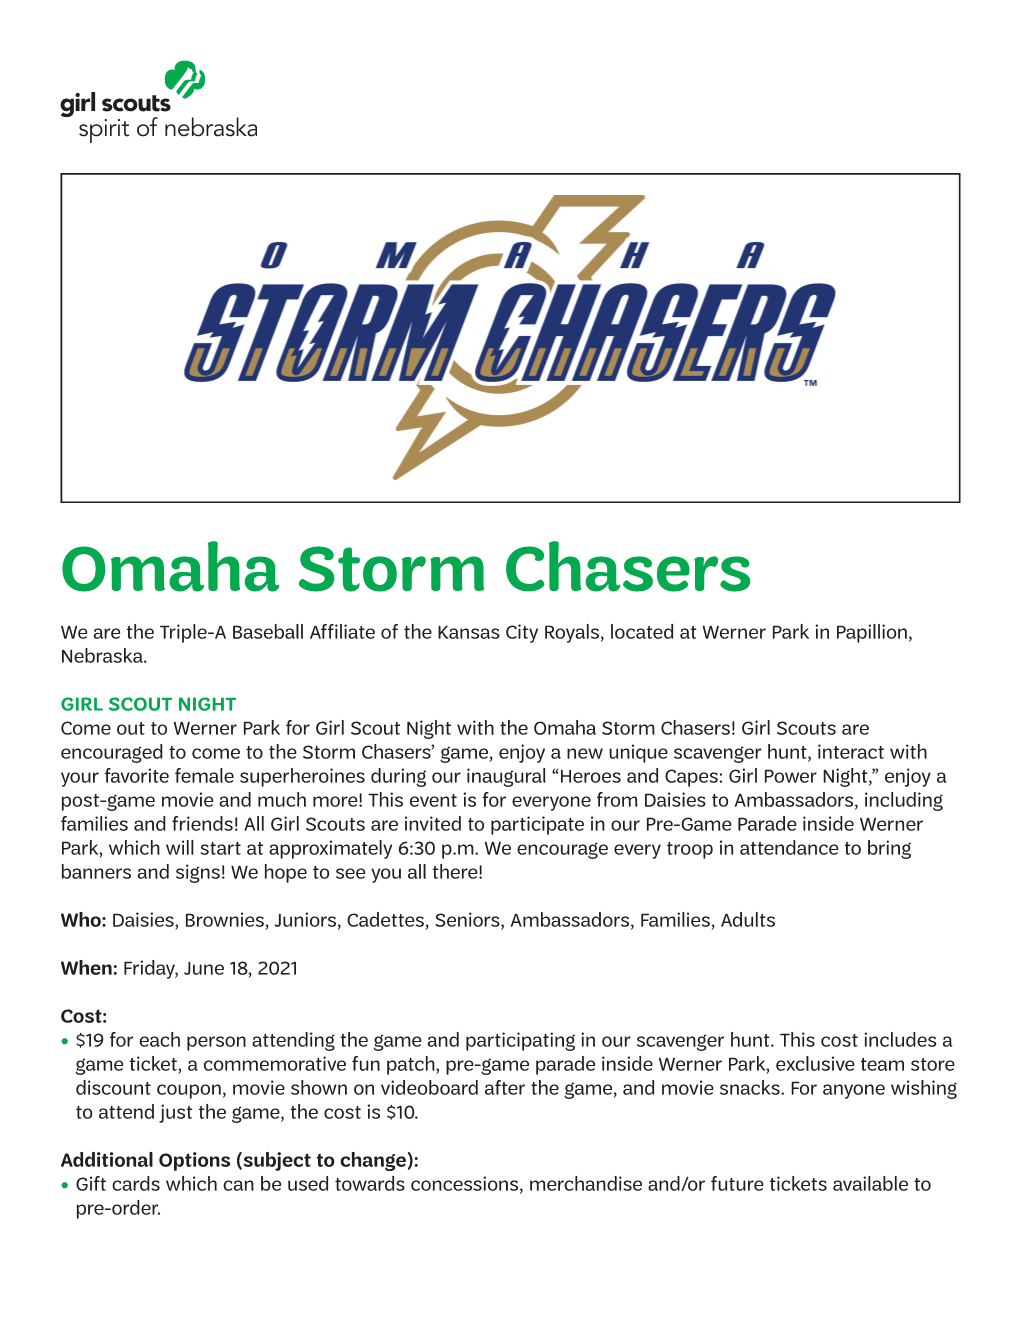 Omaha Storm Chasers We Are the Triple-A Baseball Affiliate of the Kansas City Royals, Located at Werner Park in Papillion, Nebraska